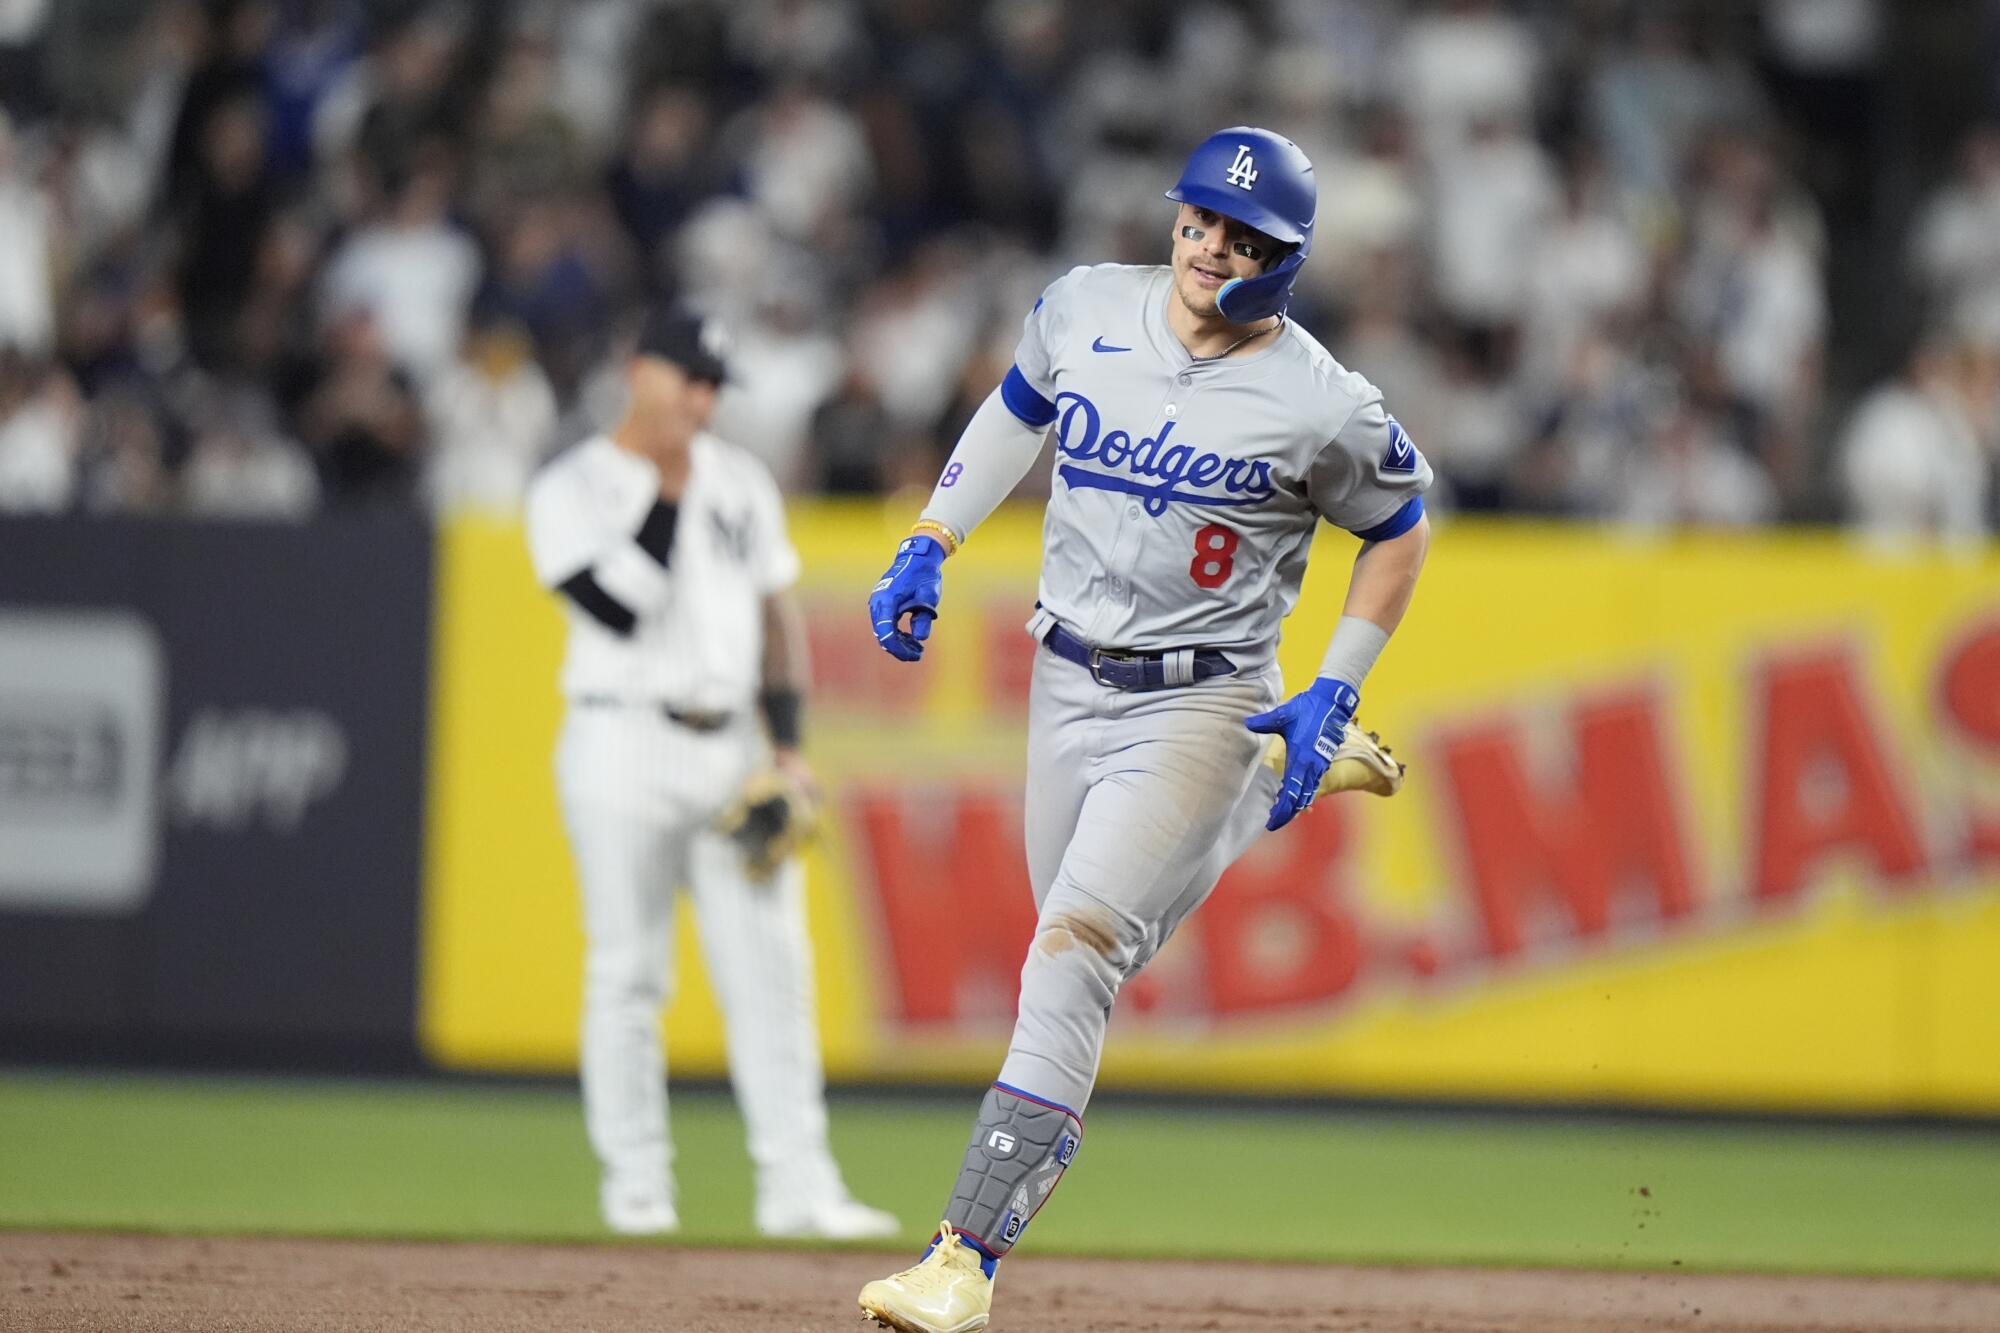 The Dodgers' Kiké Hernández rounds the bases after hitting a home run during Saturday's game against the Yankees.